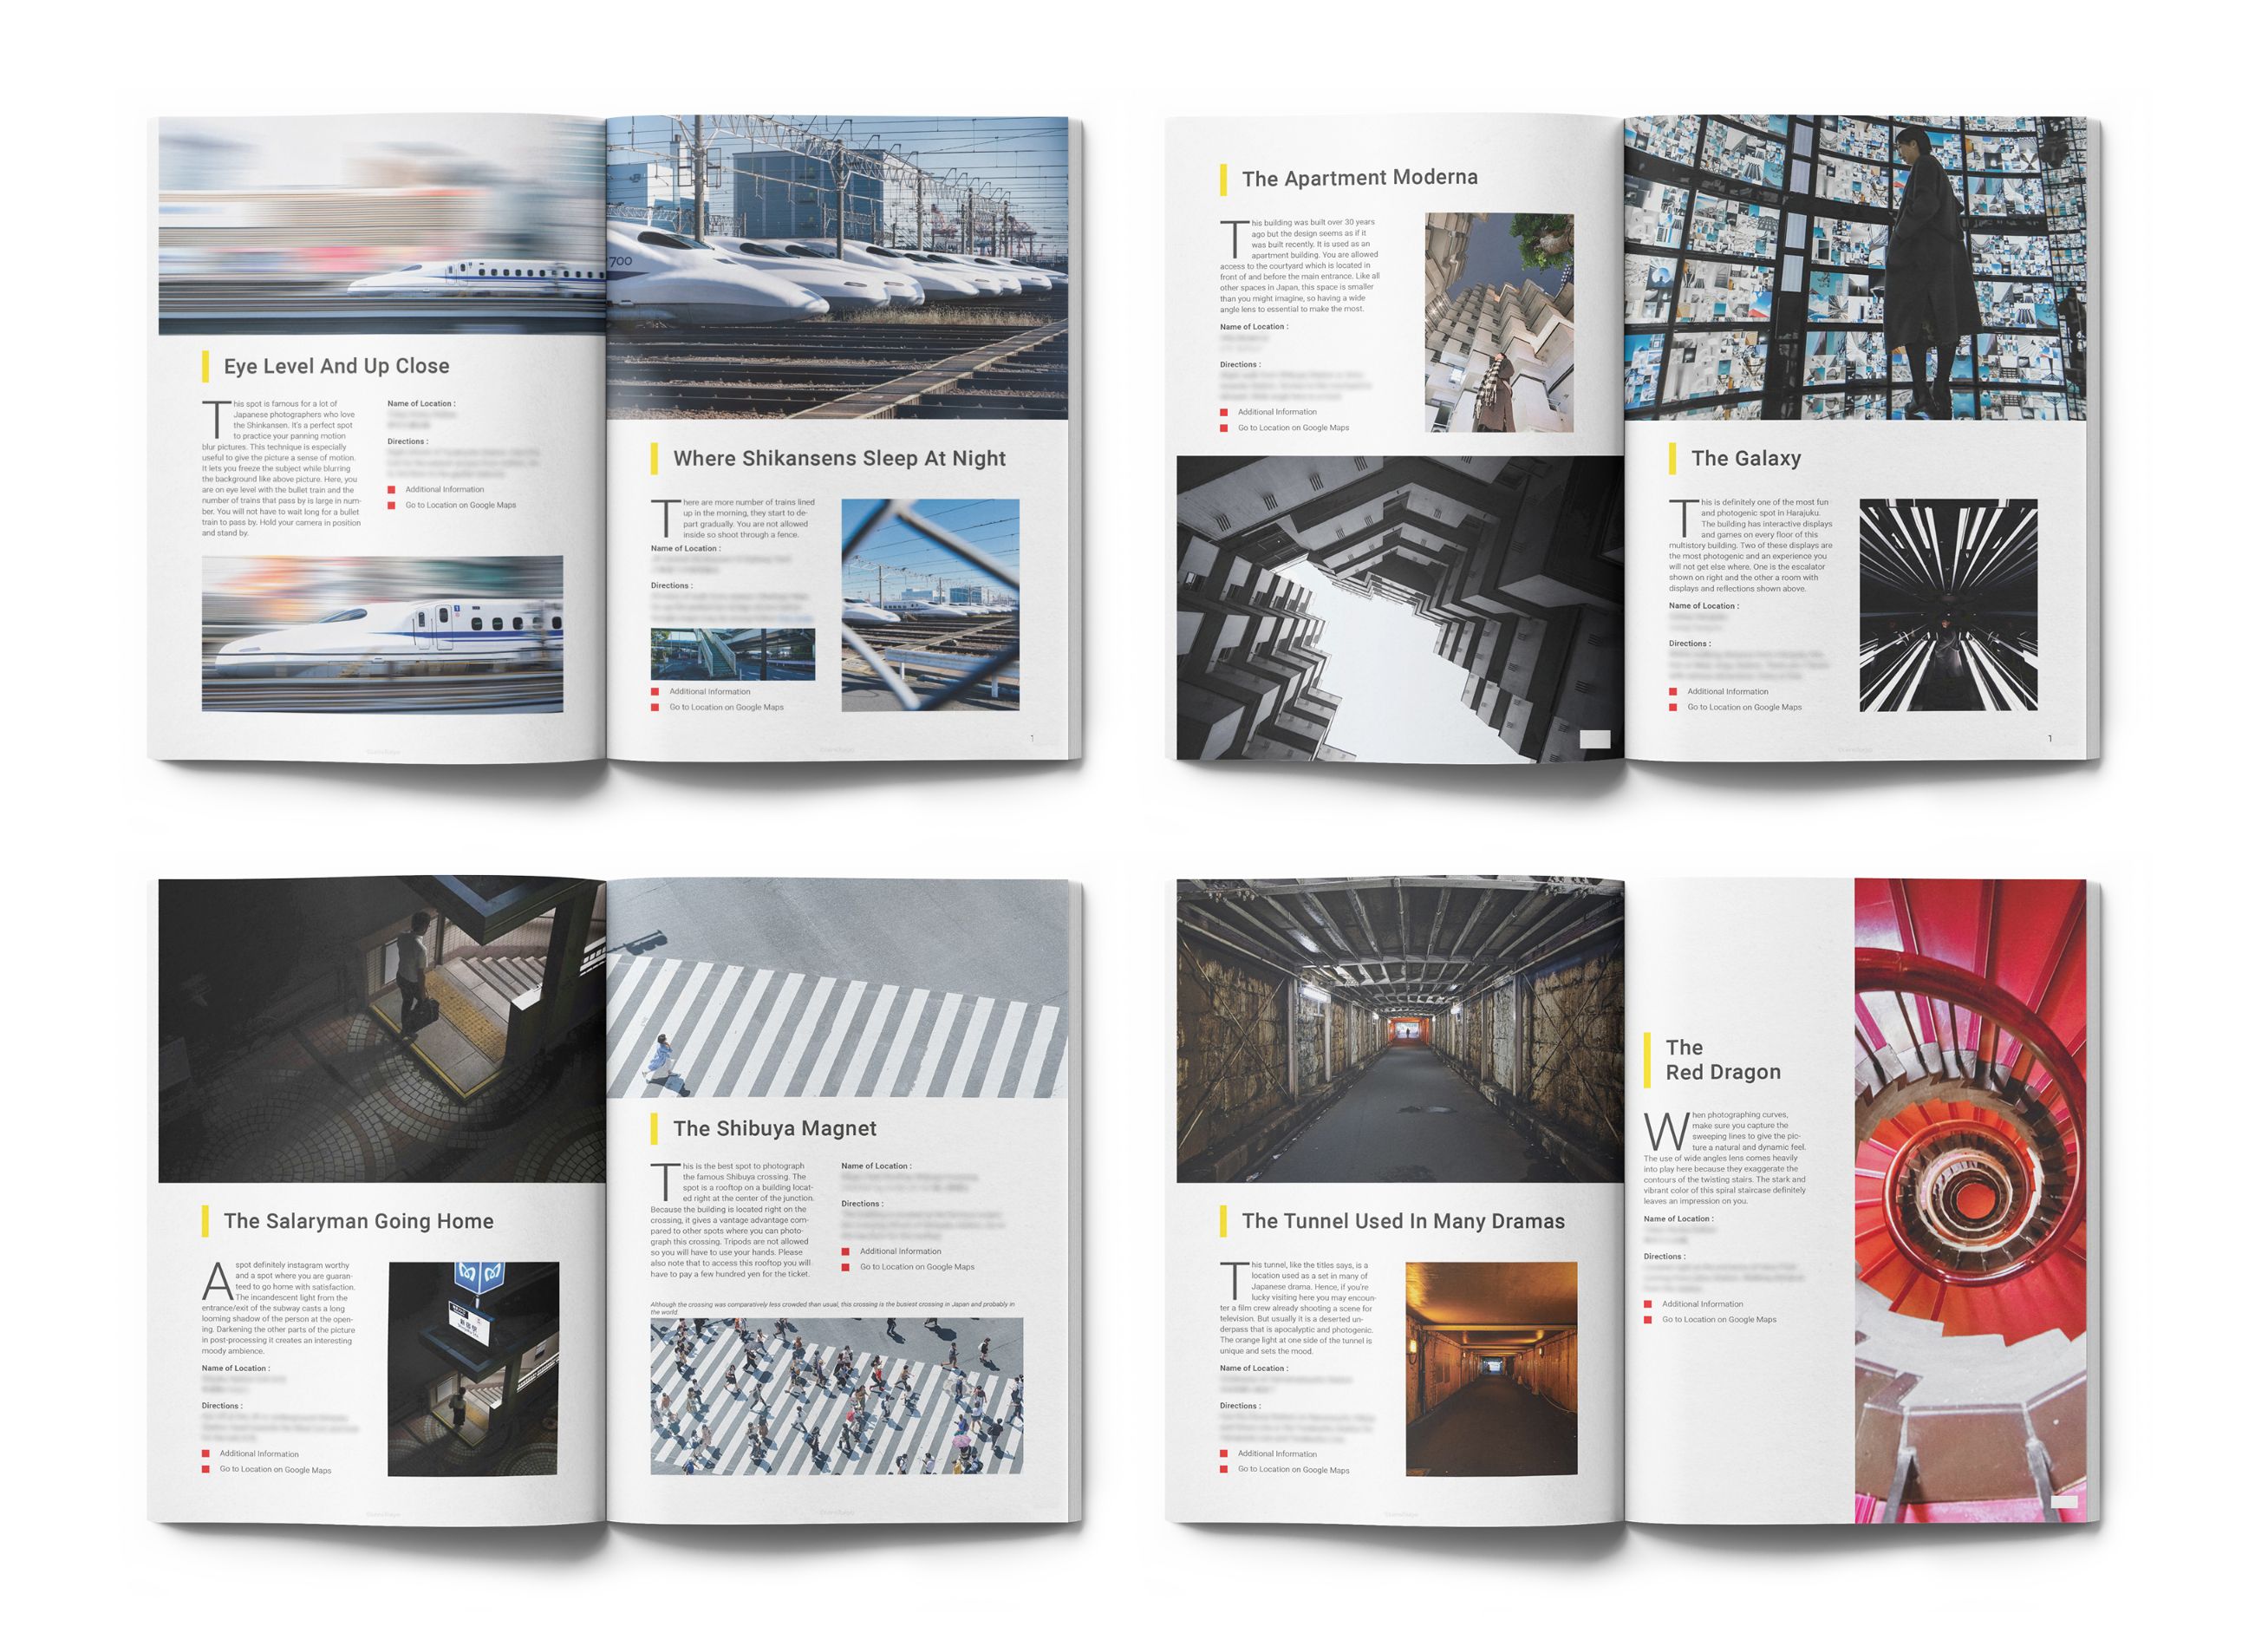 Introducing LensTokyo's Tokyo Photography Guide instagram picture guide book for photography in tokyo location